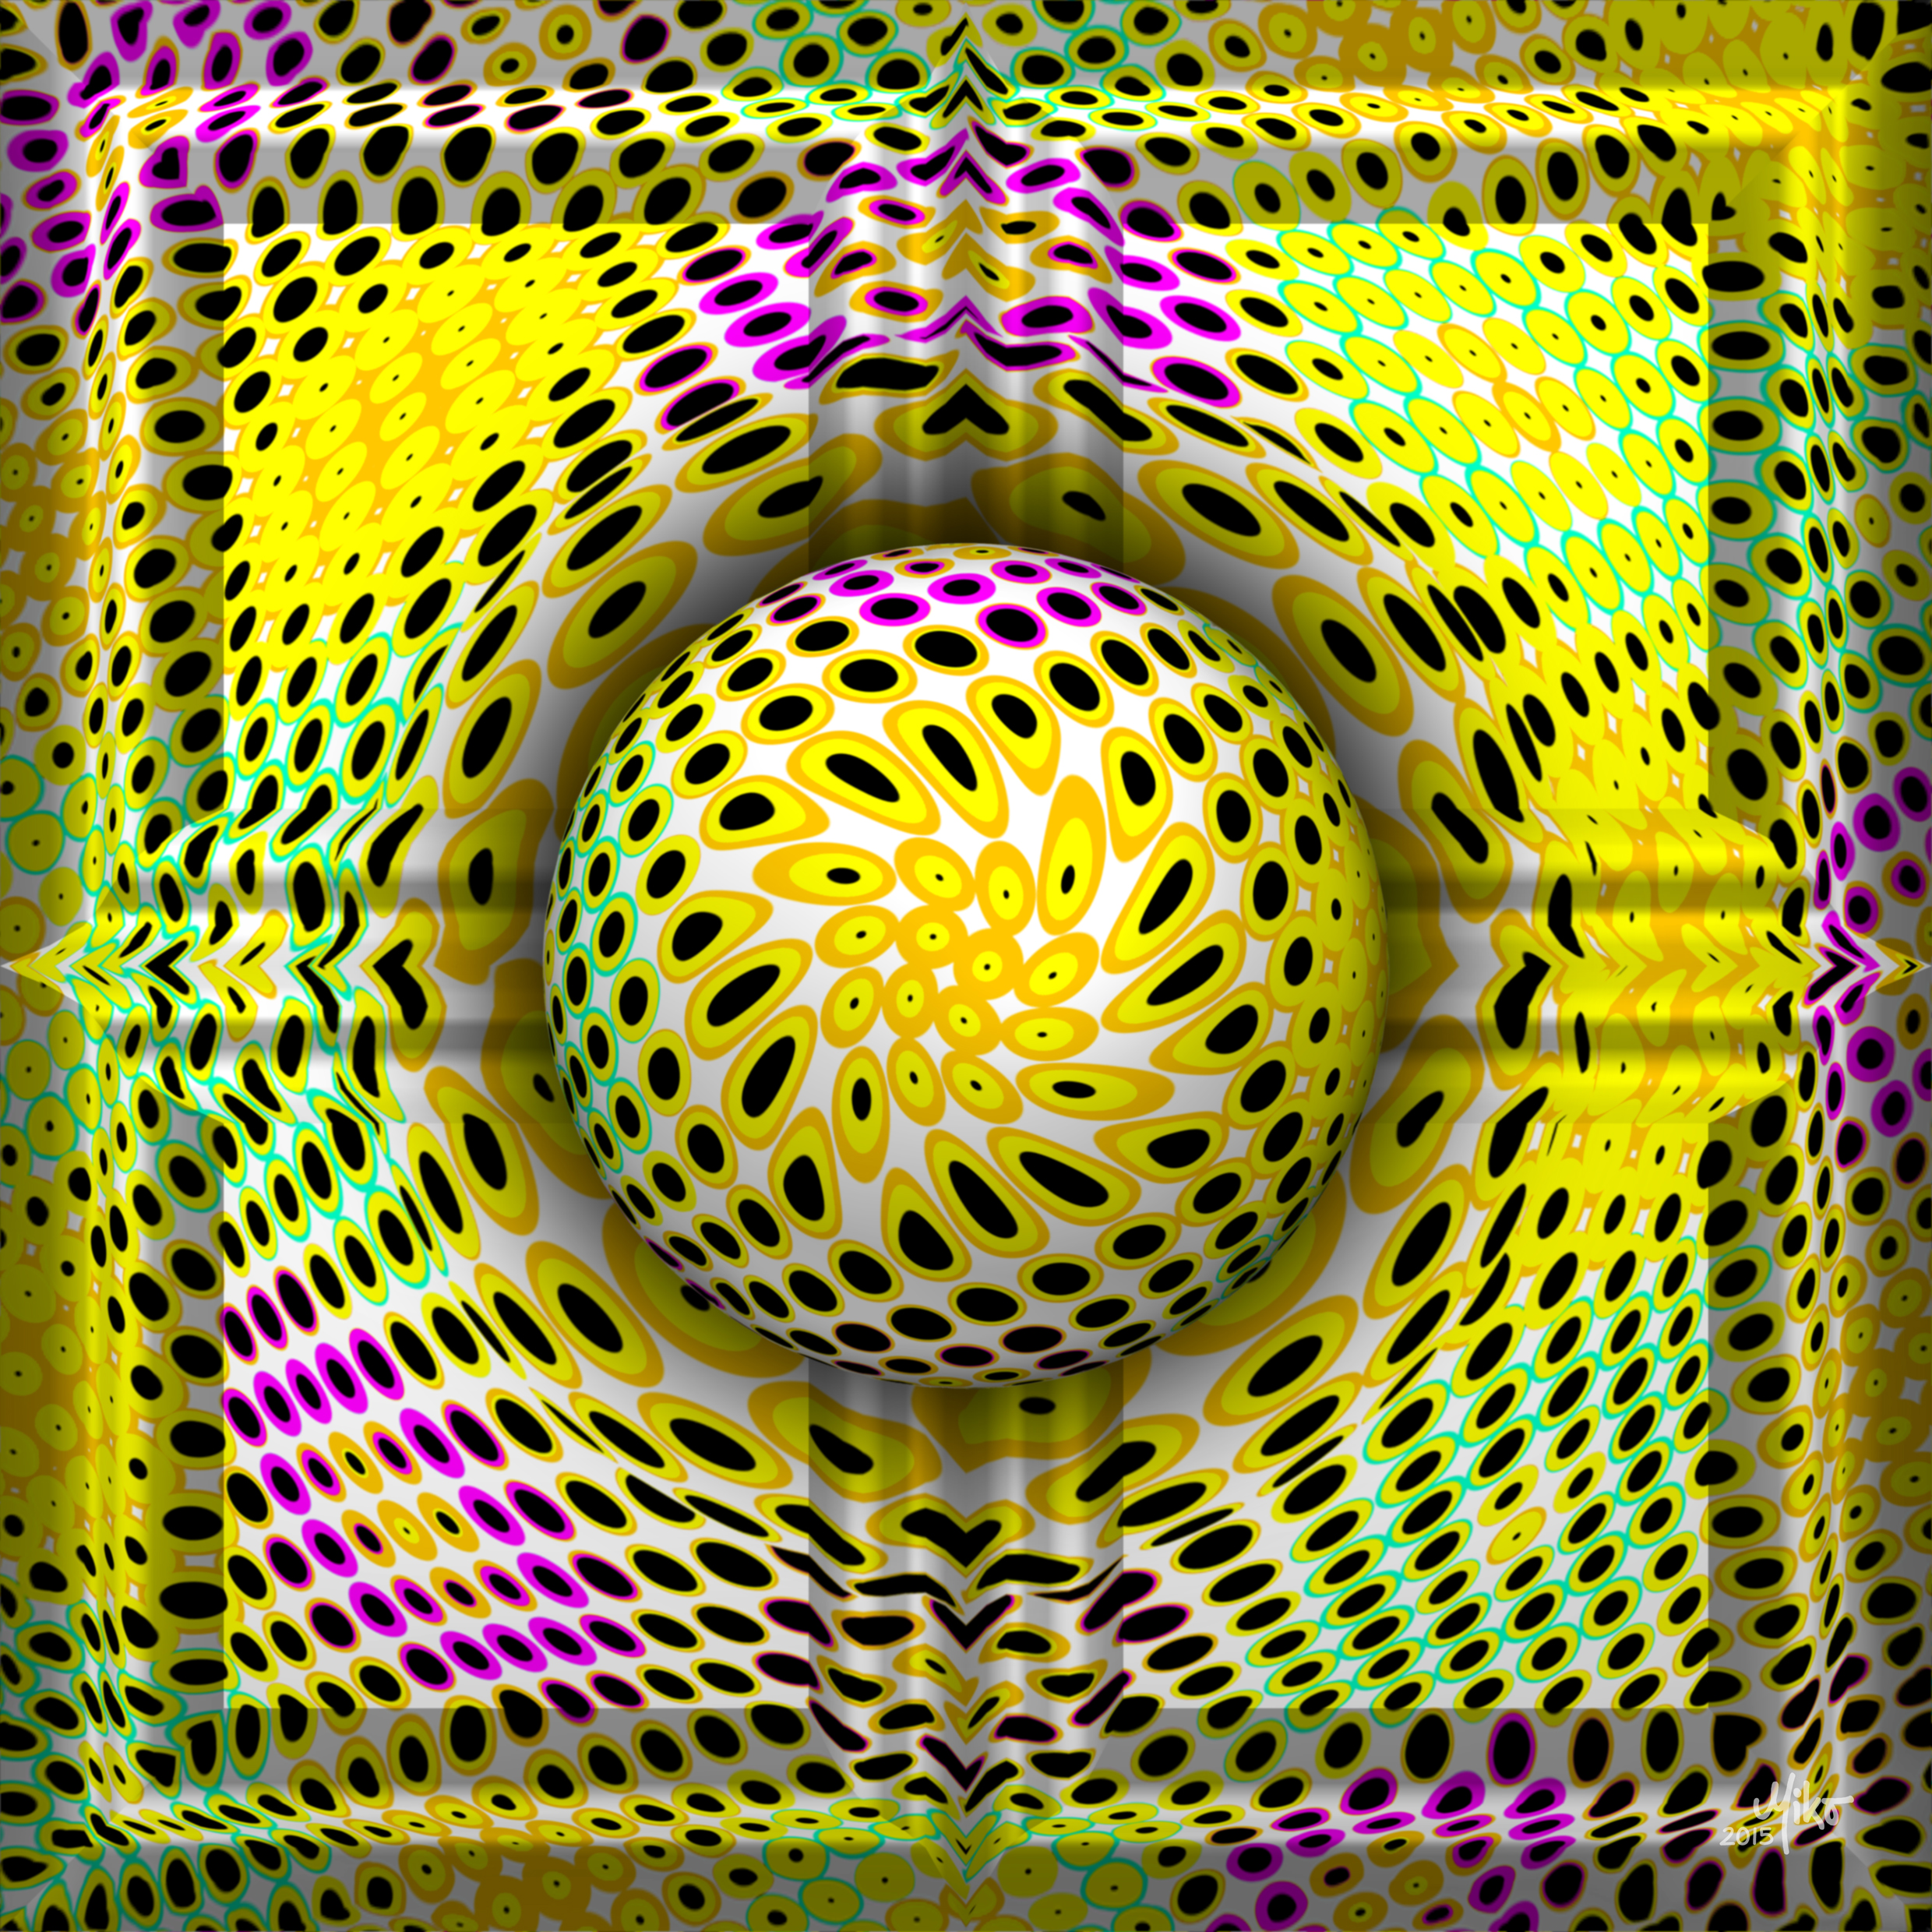 Miko-Art ""Changed Circles 0086 2015"" (Digital-Physical Painting) 80x80cm. - Image 3 of 5